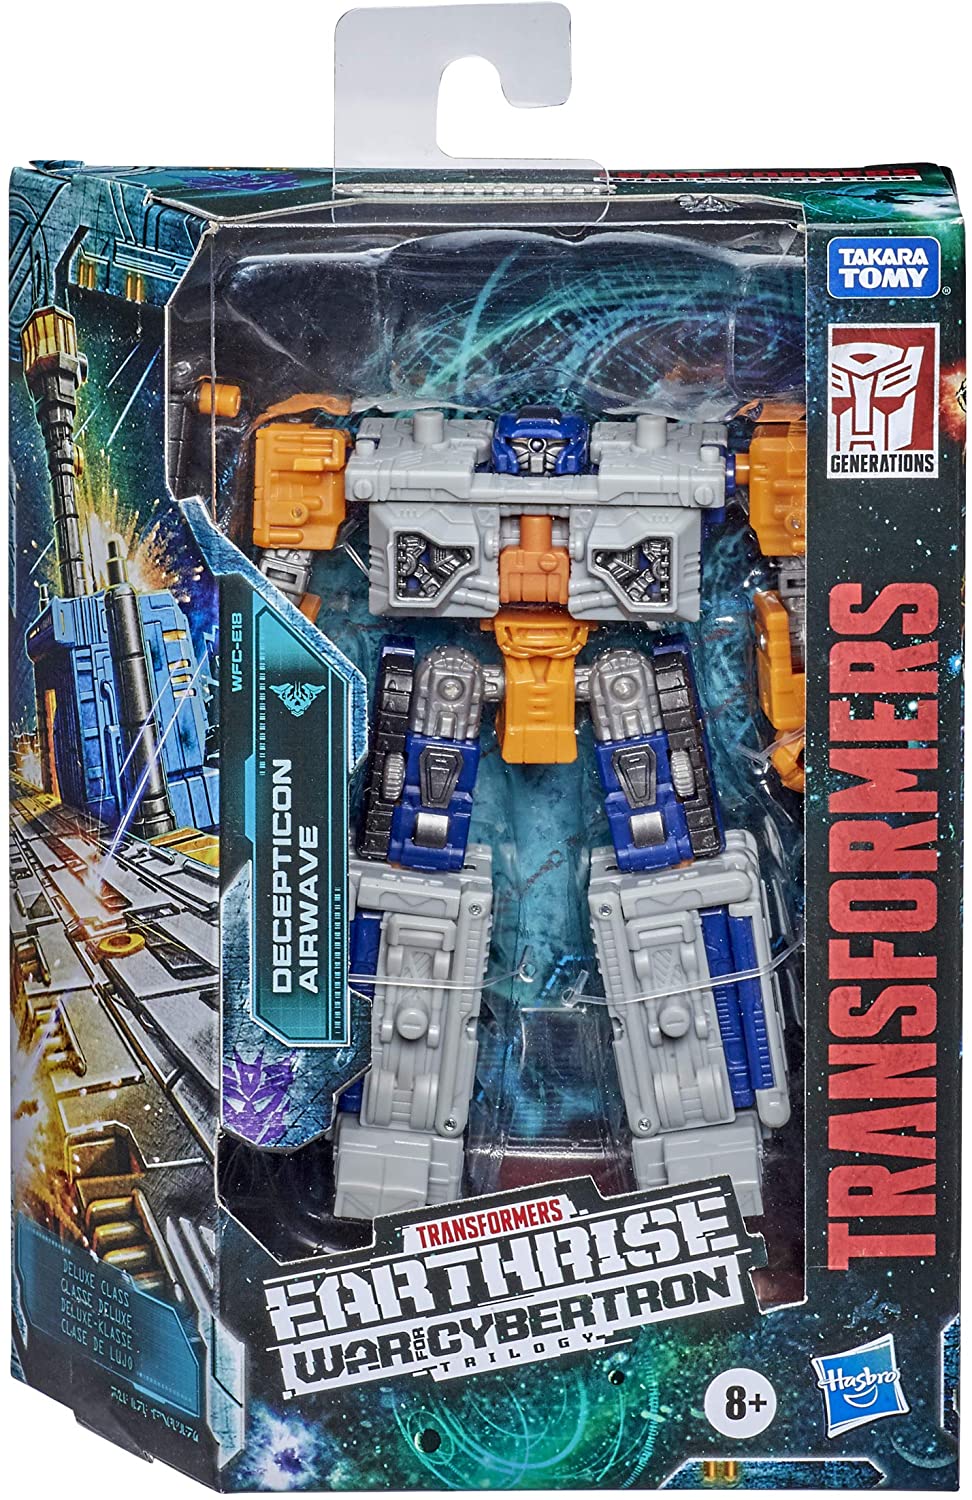 Transformers Earthrise: War for Cybertron Figures